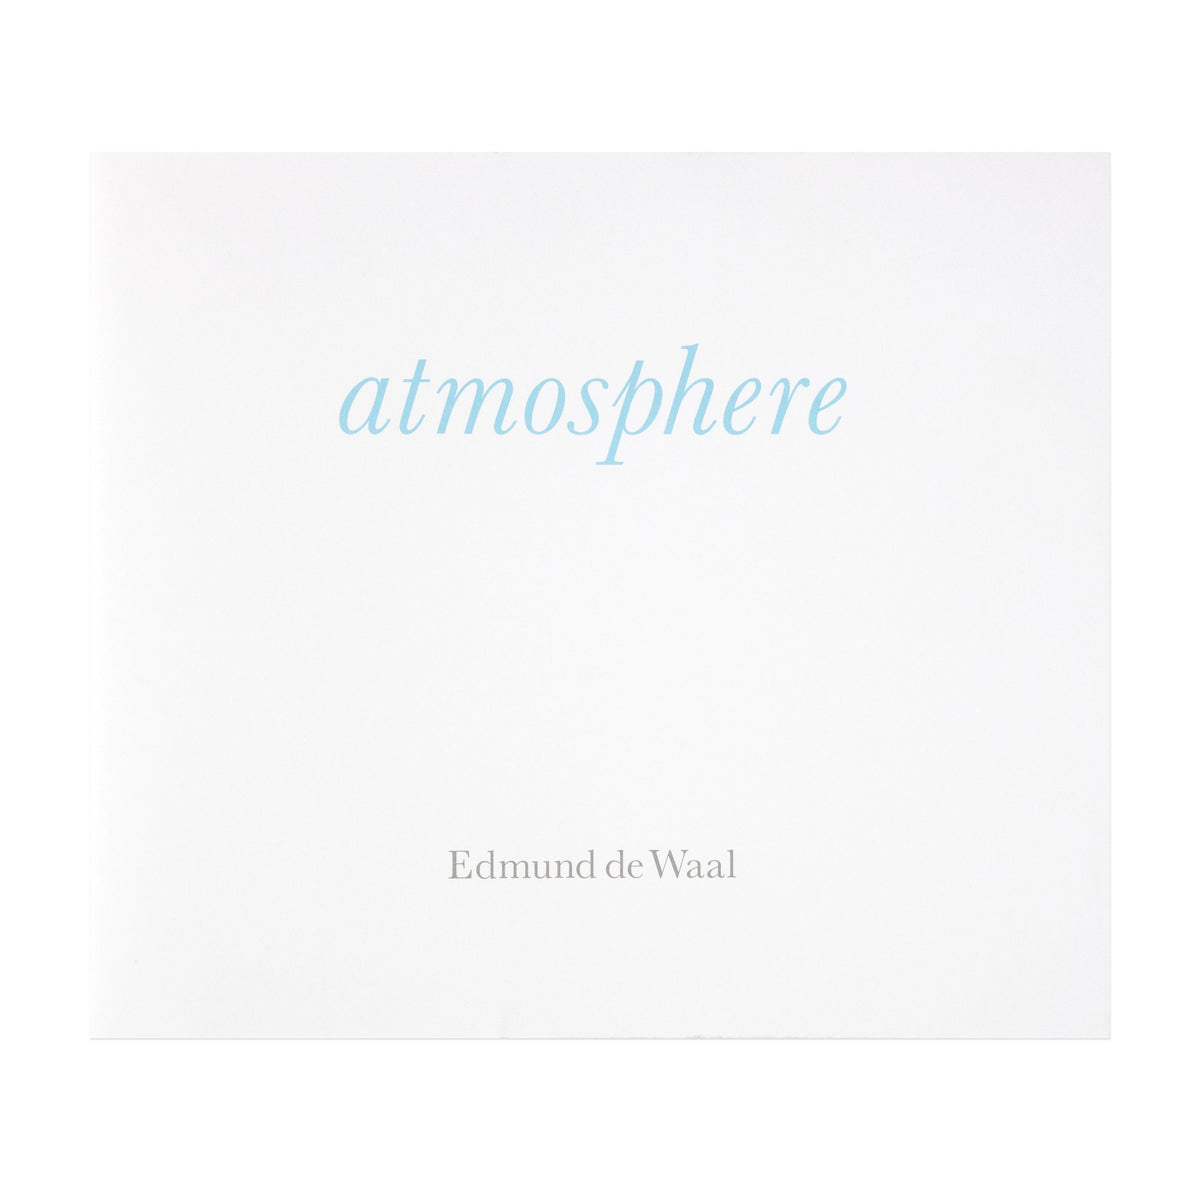 Cover of the book Edmund de Waal: atmosphere